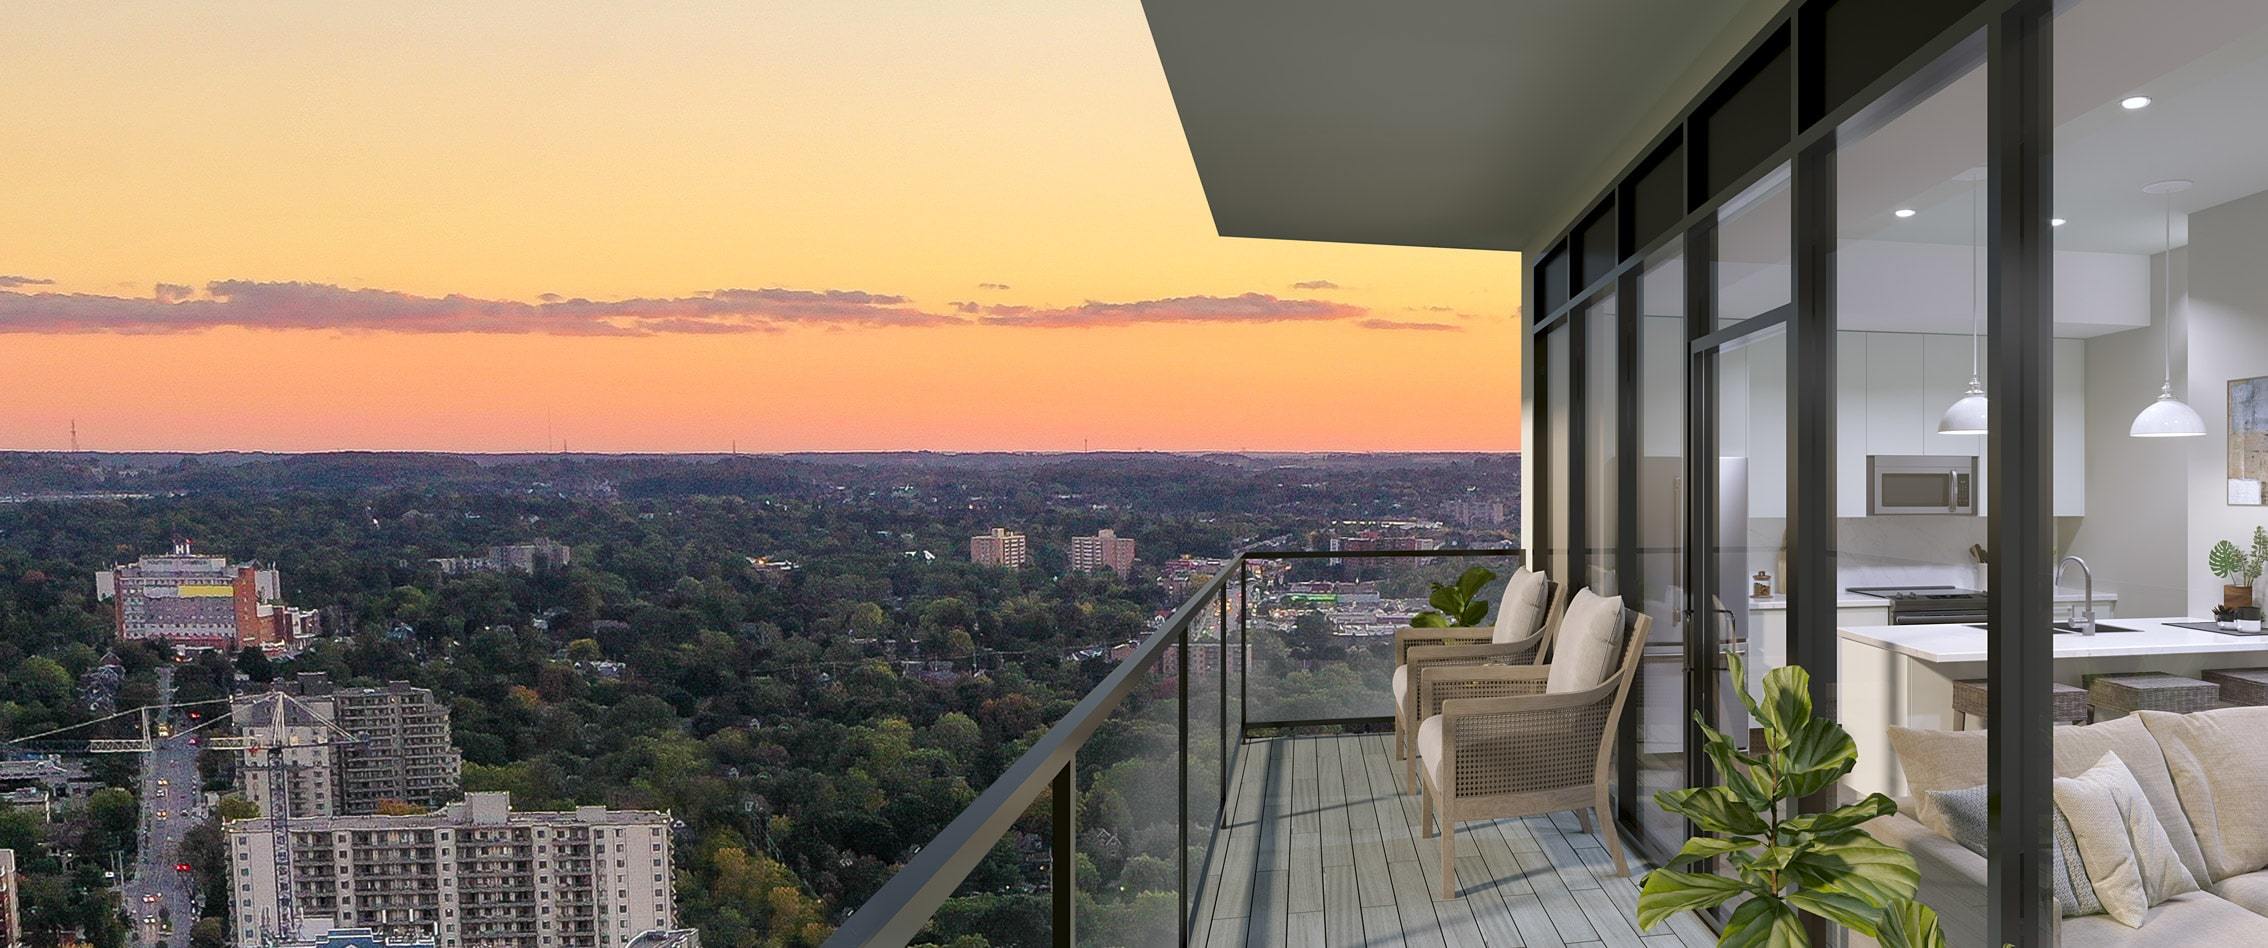 Artist rendering of Q Condos balcony view over Kitchener during sunset